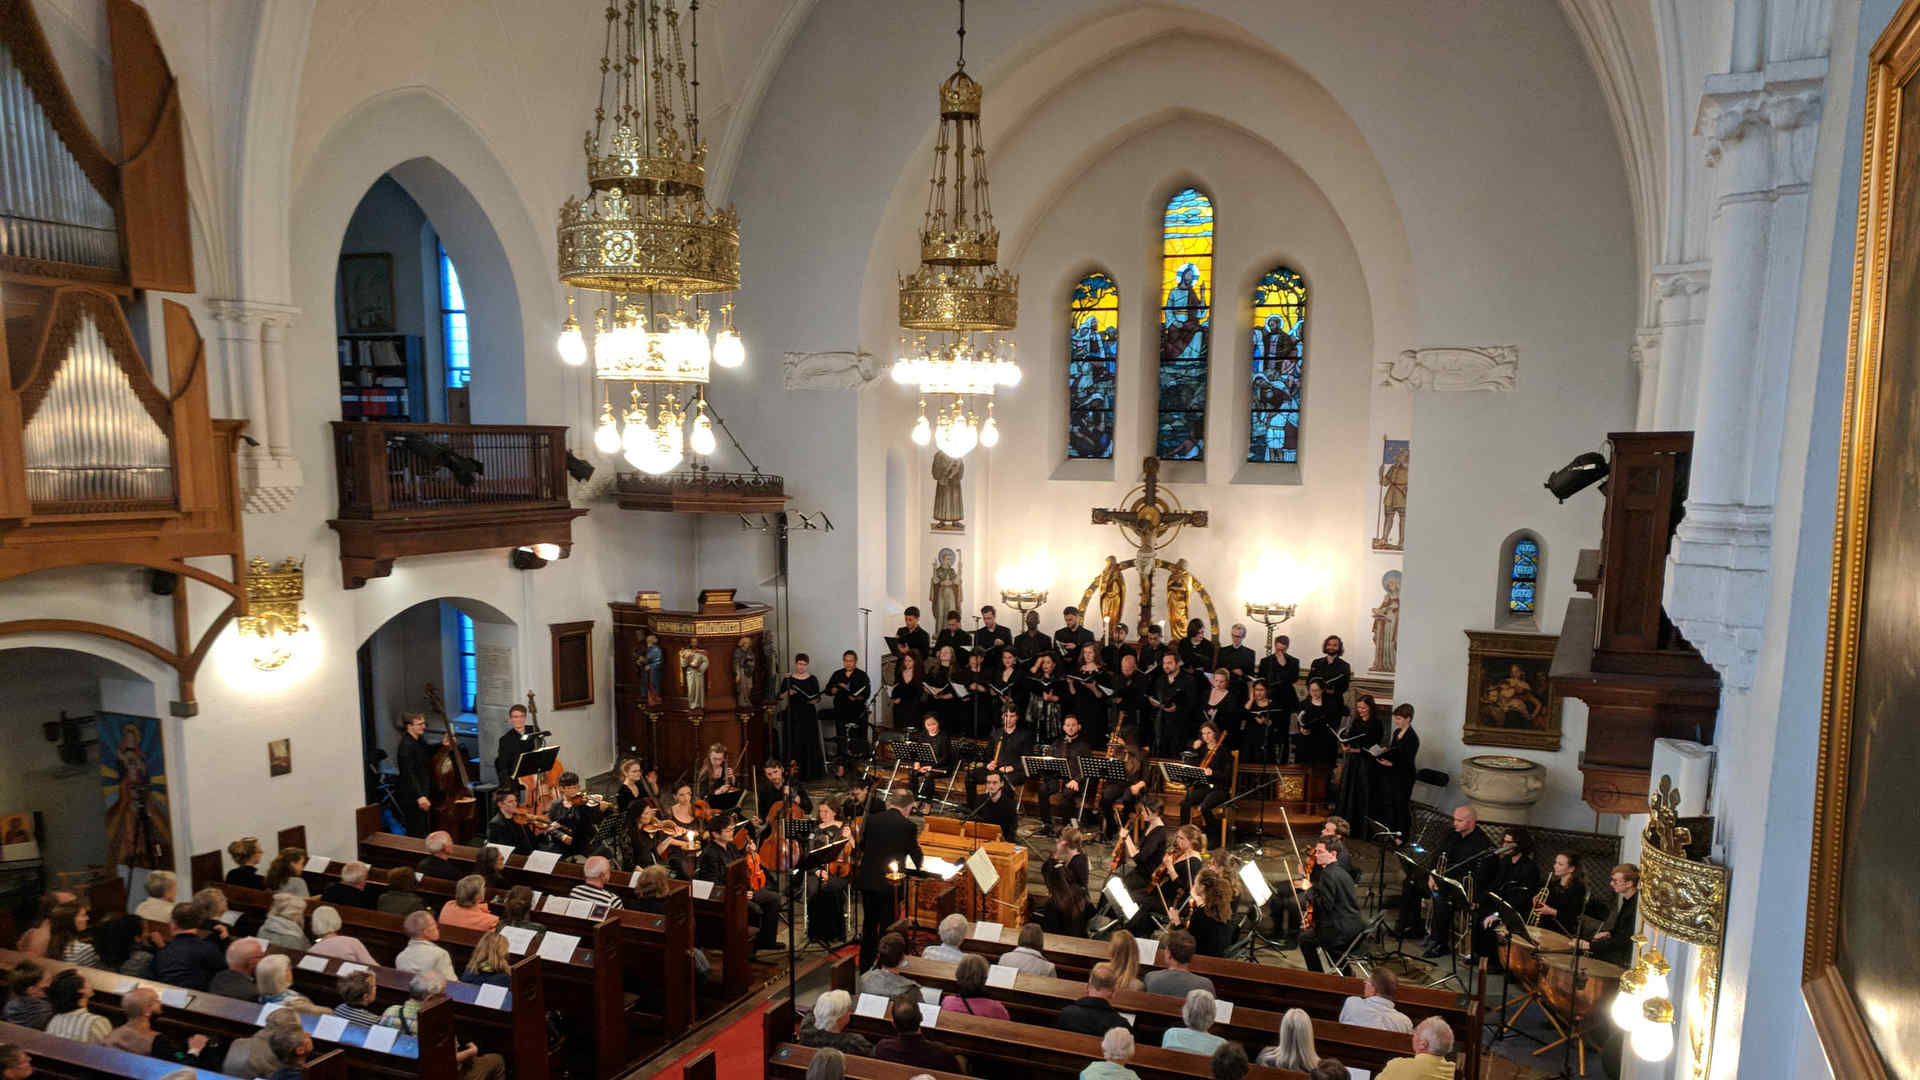 Performance photo showing the sanctuary, looking down from above, of the church where the Juilliard415 ensemble and the Yale Schola Cantorum performed this summer